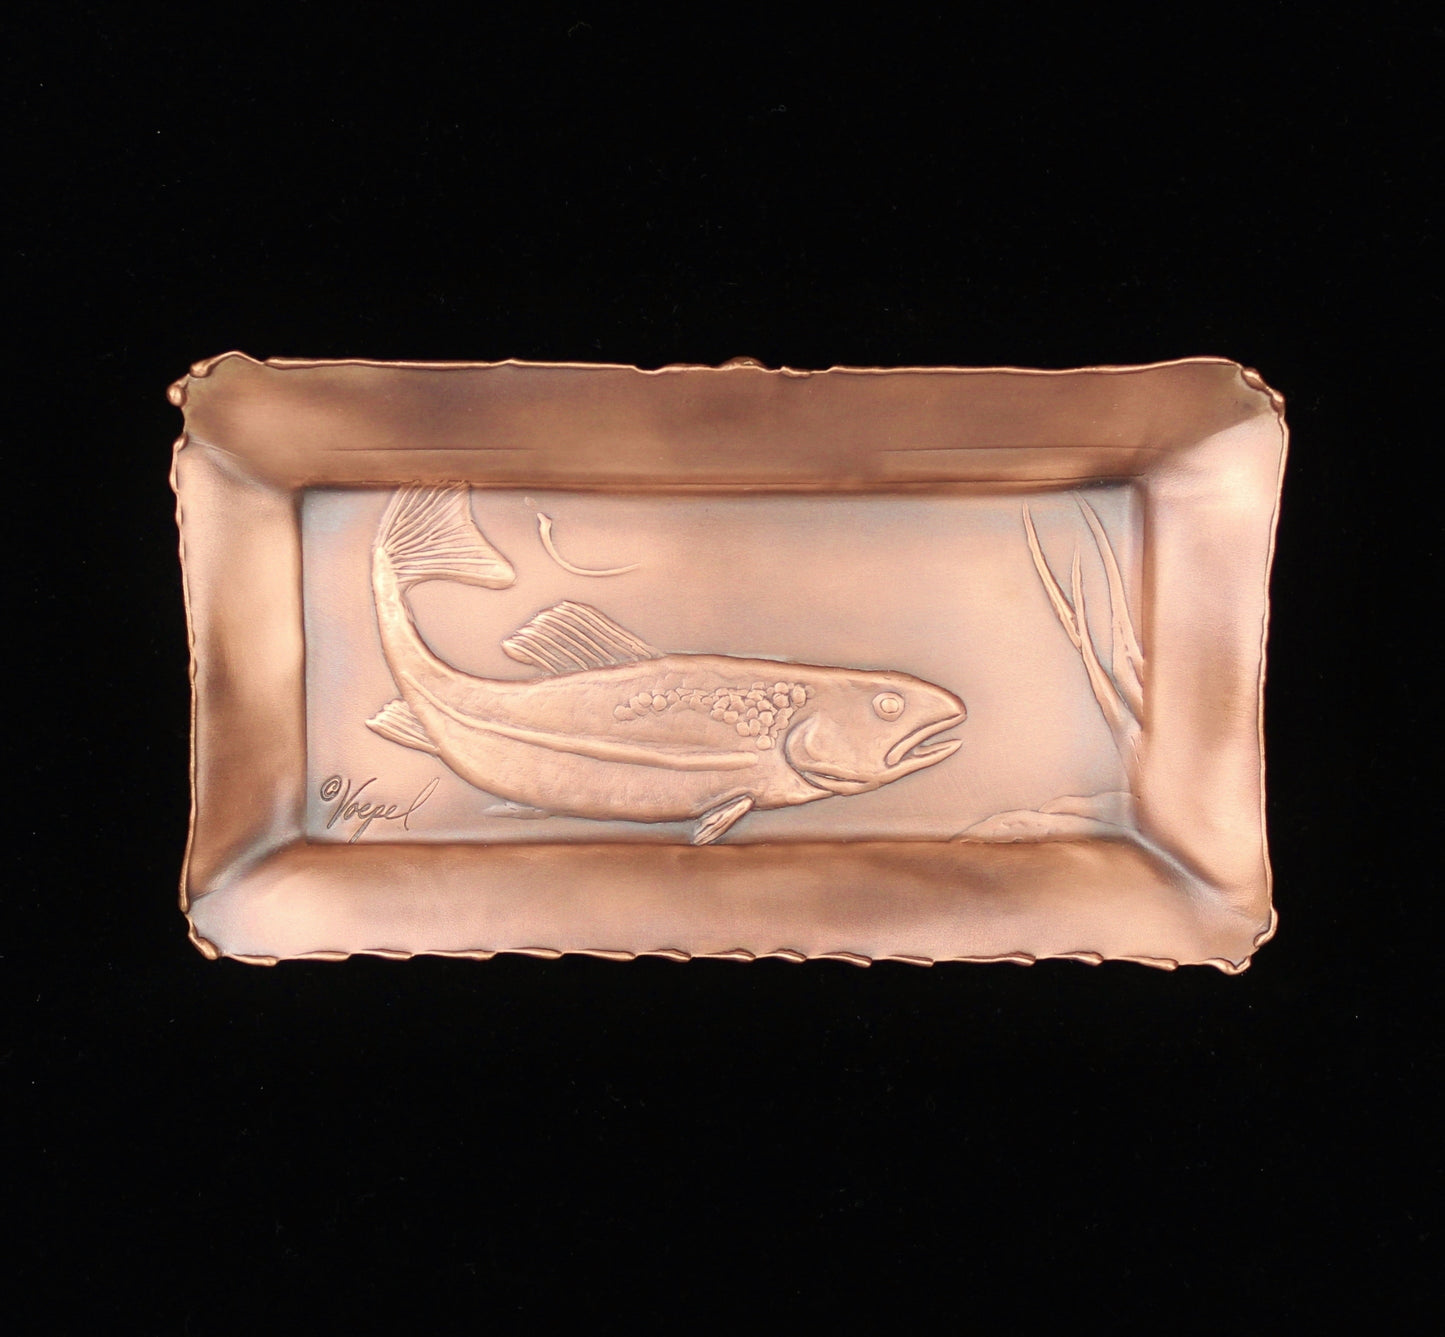 Trout Art Tile/Tray, Copper, Facing Right, 4" x 7"